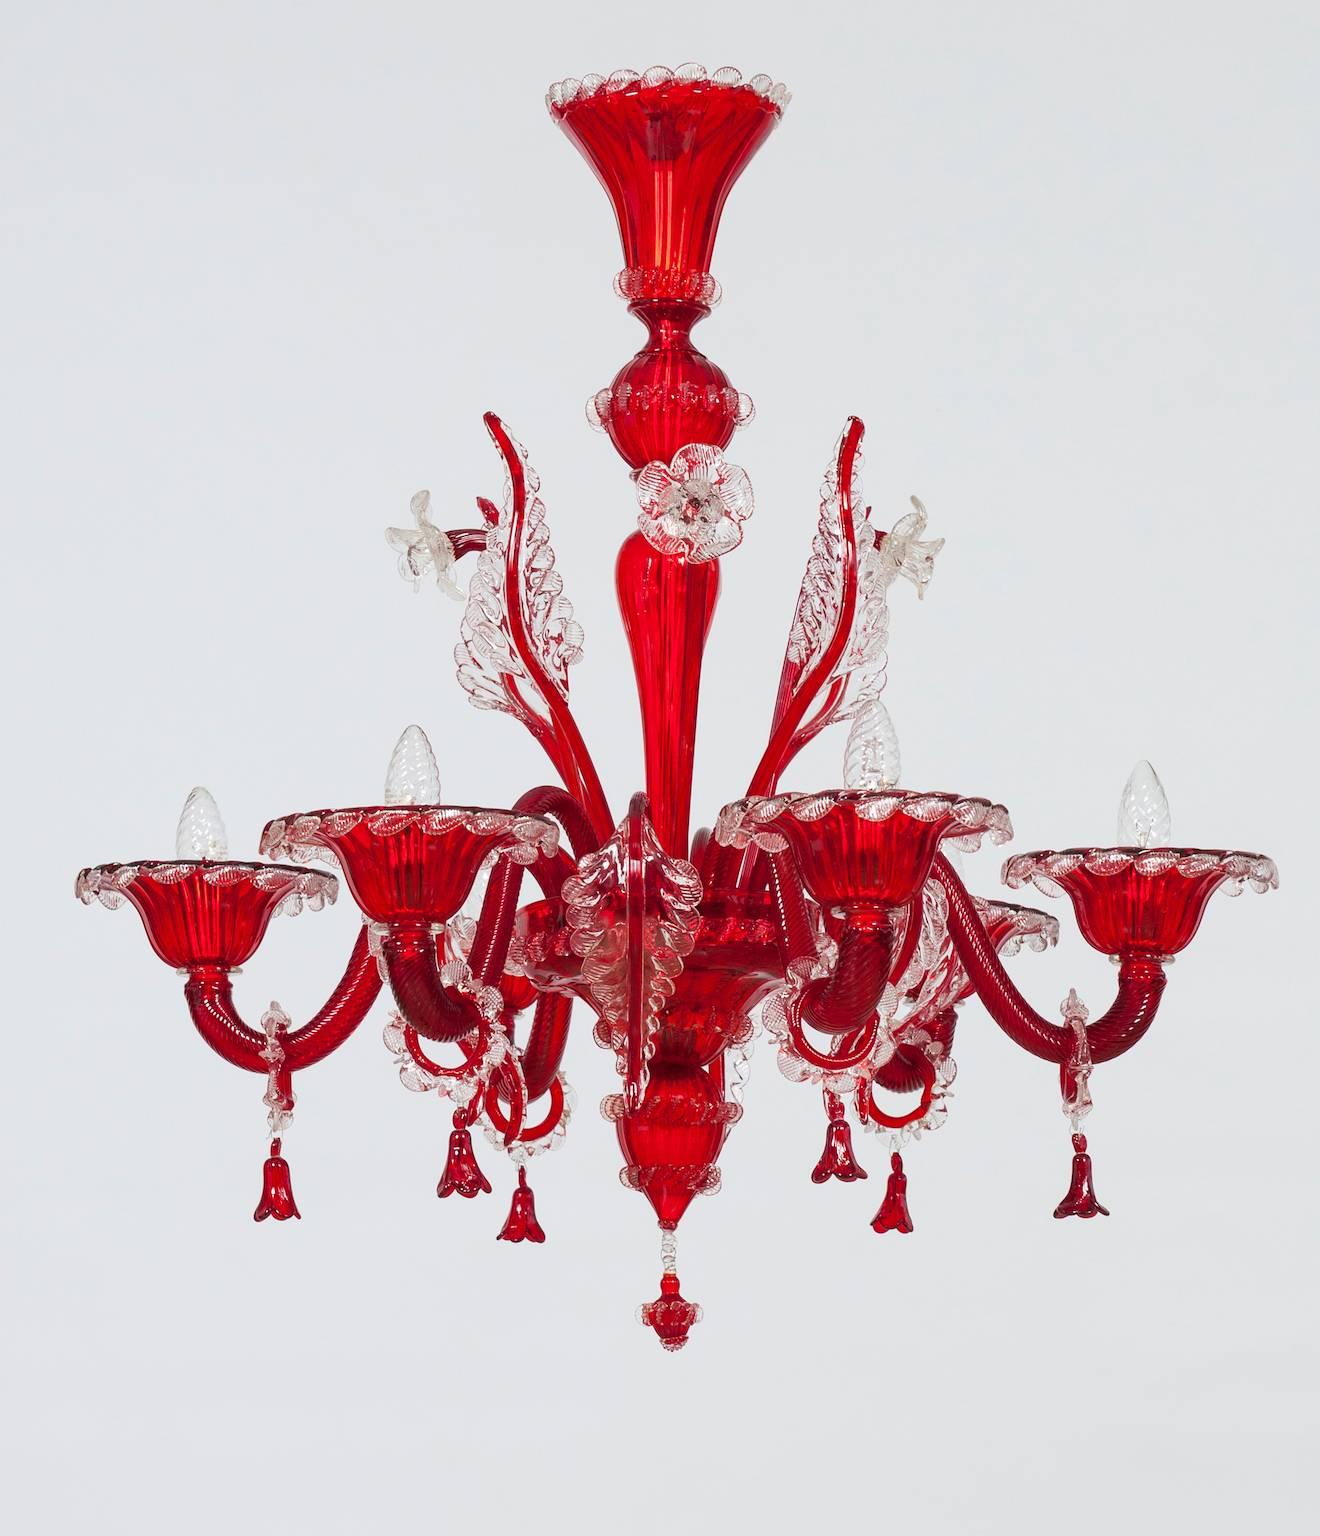 Elegant Italian Venetian, Chandelier, Blown Murano Glass, Red and Transparent, 1990s.
The  portrait is made up of six arms each one having a bulb, surrounded by flowers and leaves high and low, with transparent refinishing, in a red tone color. The